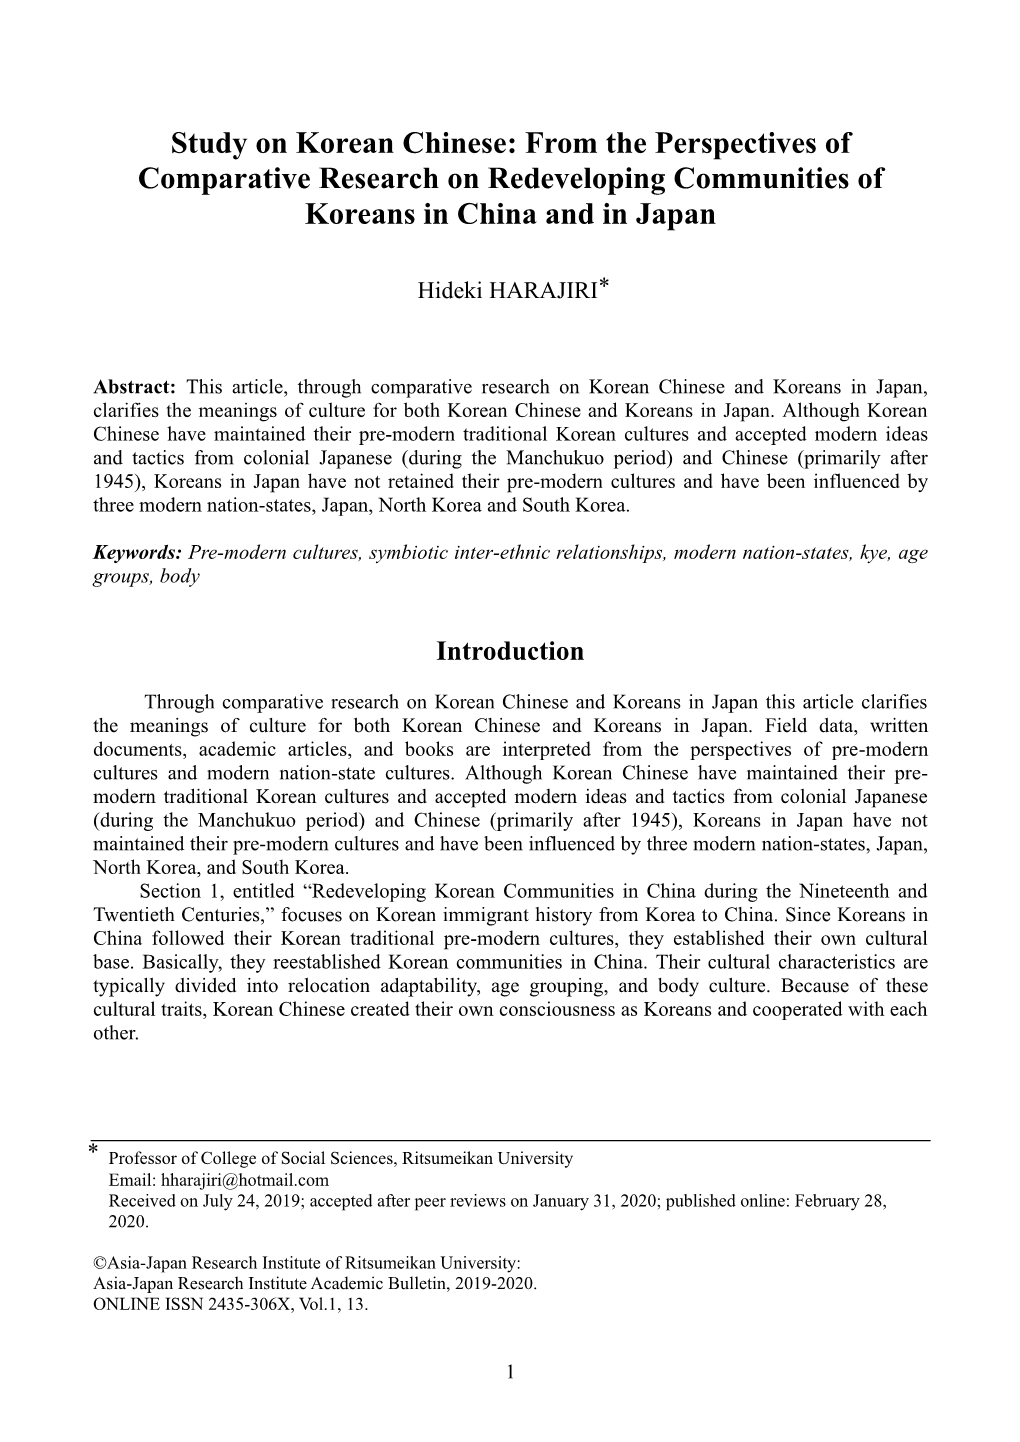 Study on Korean Chinese: from the Perspectives of Comparative Research on Redeveloping Communities of Koreans in China and in Japan